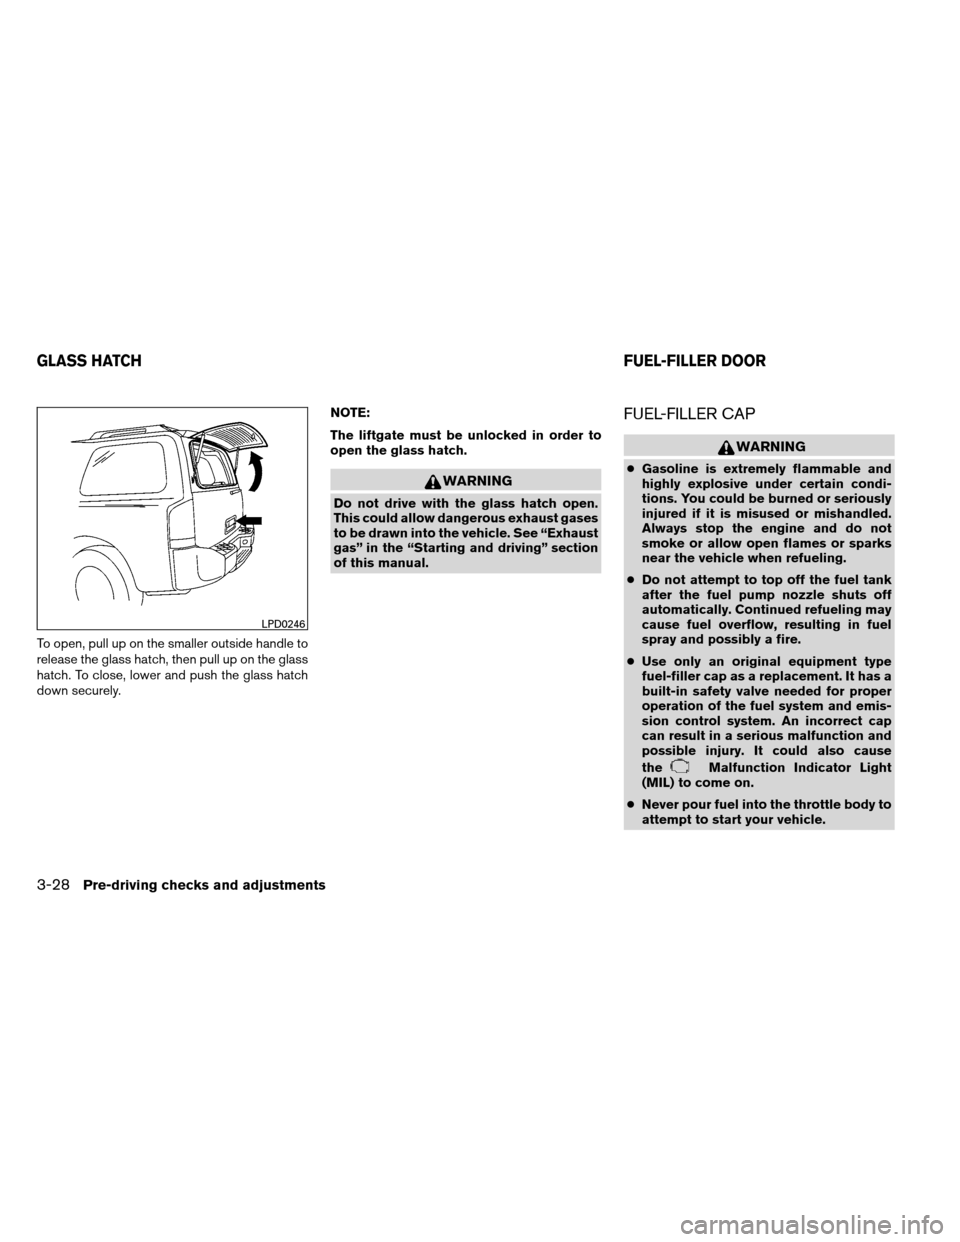 NISSAN ARMADA 2013 1.G Owners Manual To open, pull up on the smaller outside handle to
release the glass hatch, then pull up on the glass
hatch. To close, lower and push the glass hatch
down securely.NOTE:
The liftgate must be unlocked i